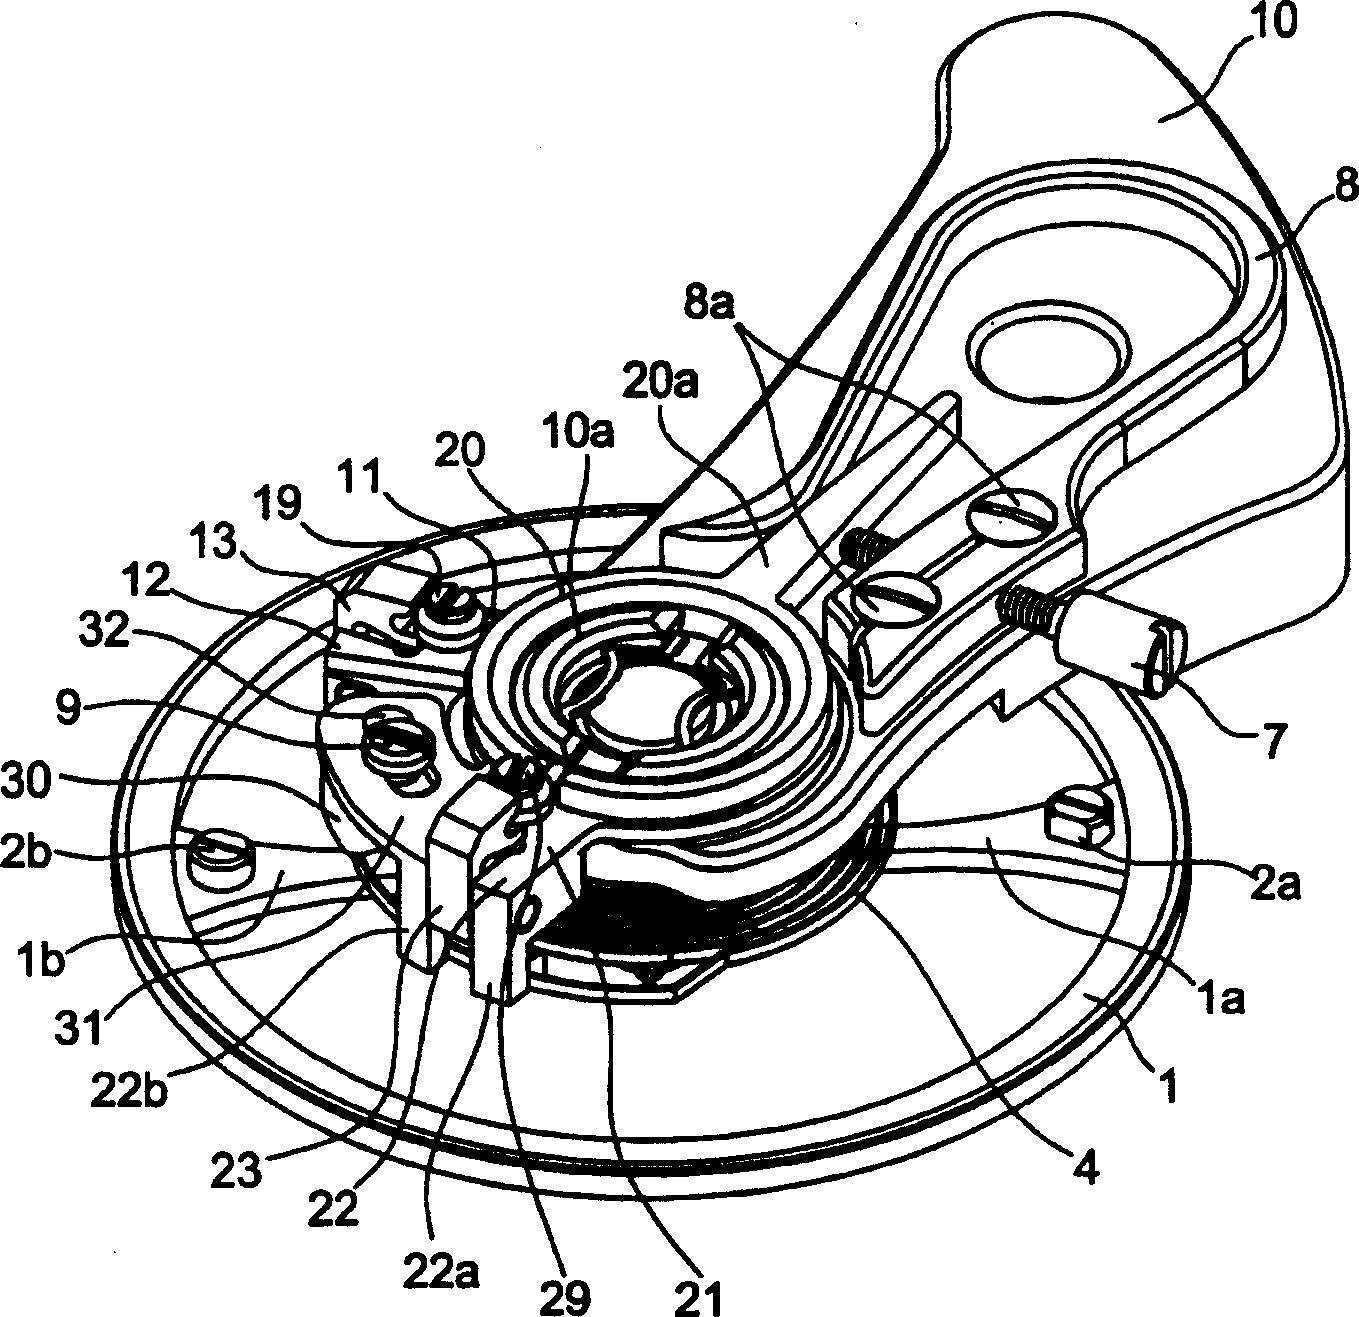 Device for the fine adjustment of a balance spring